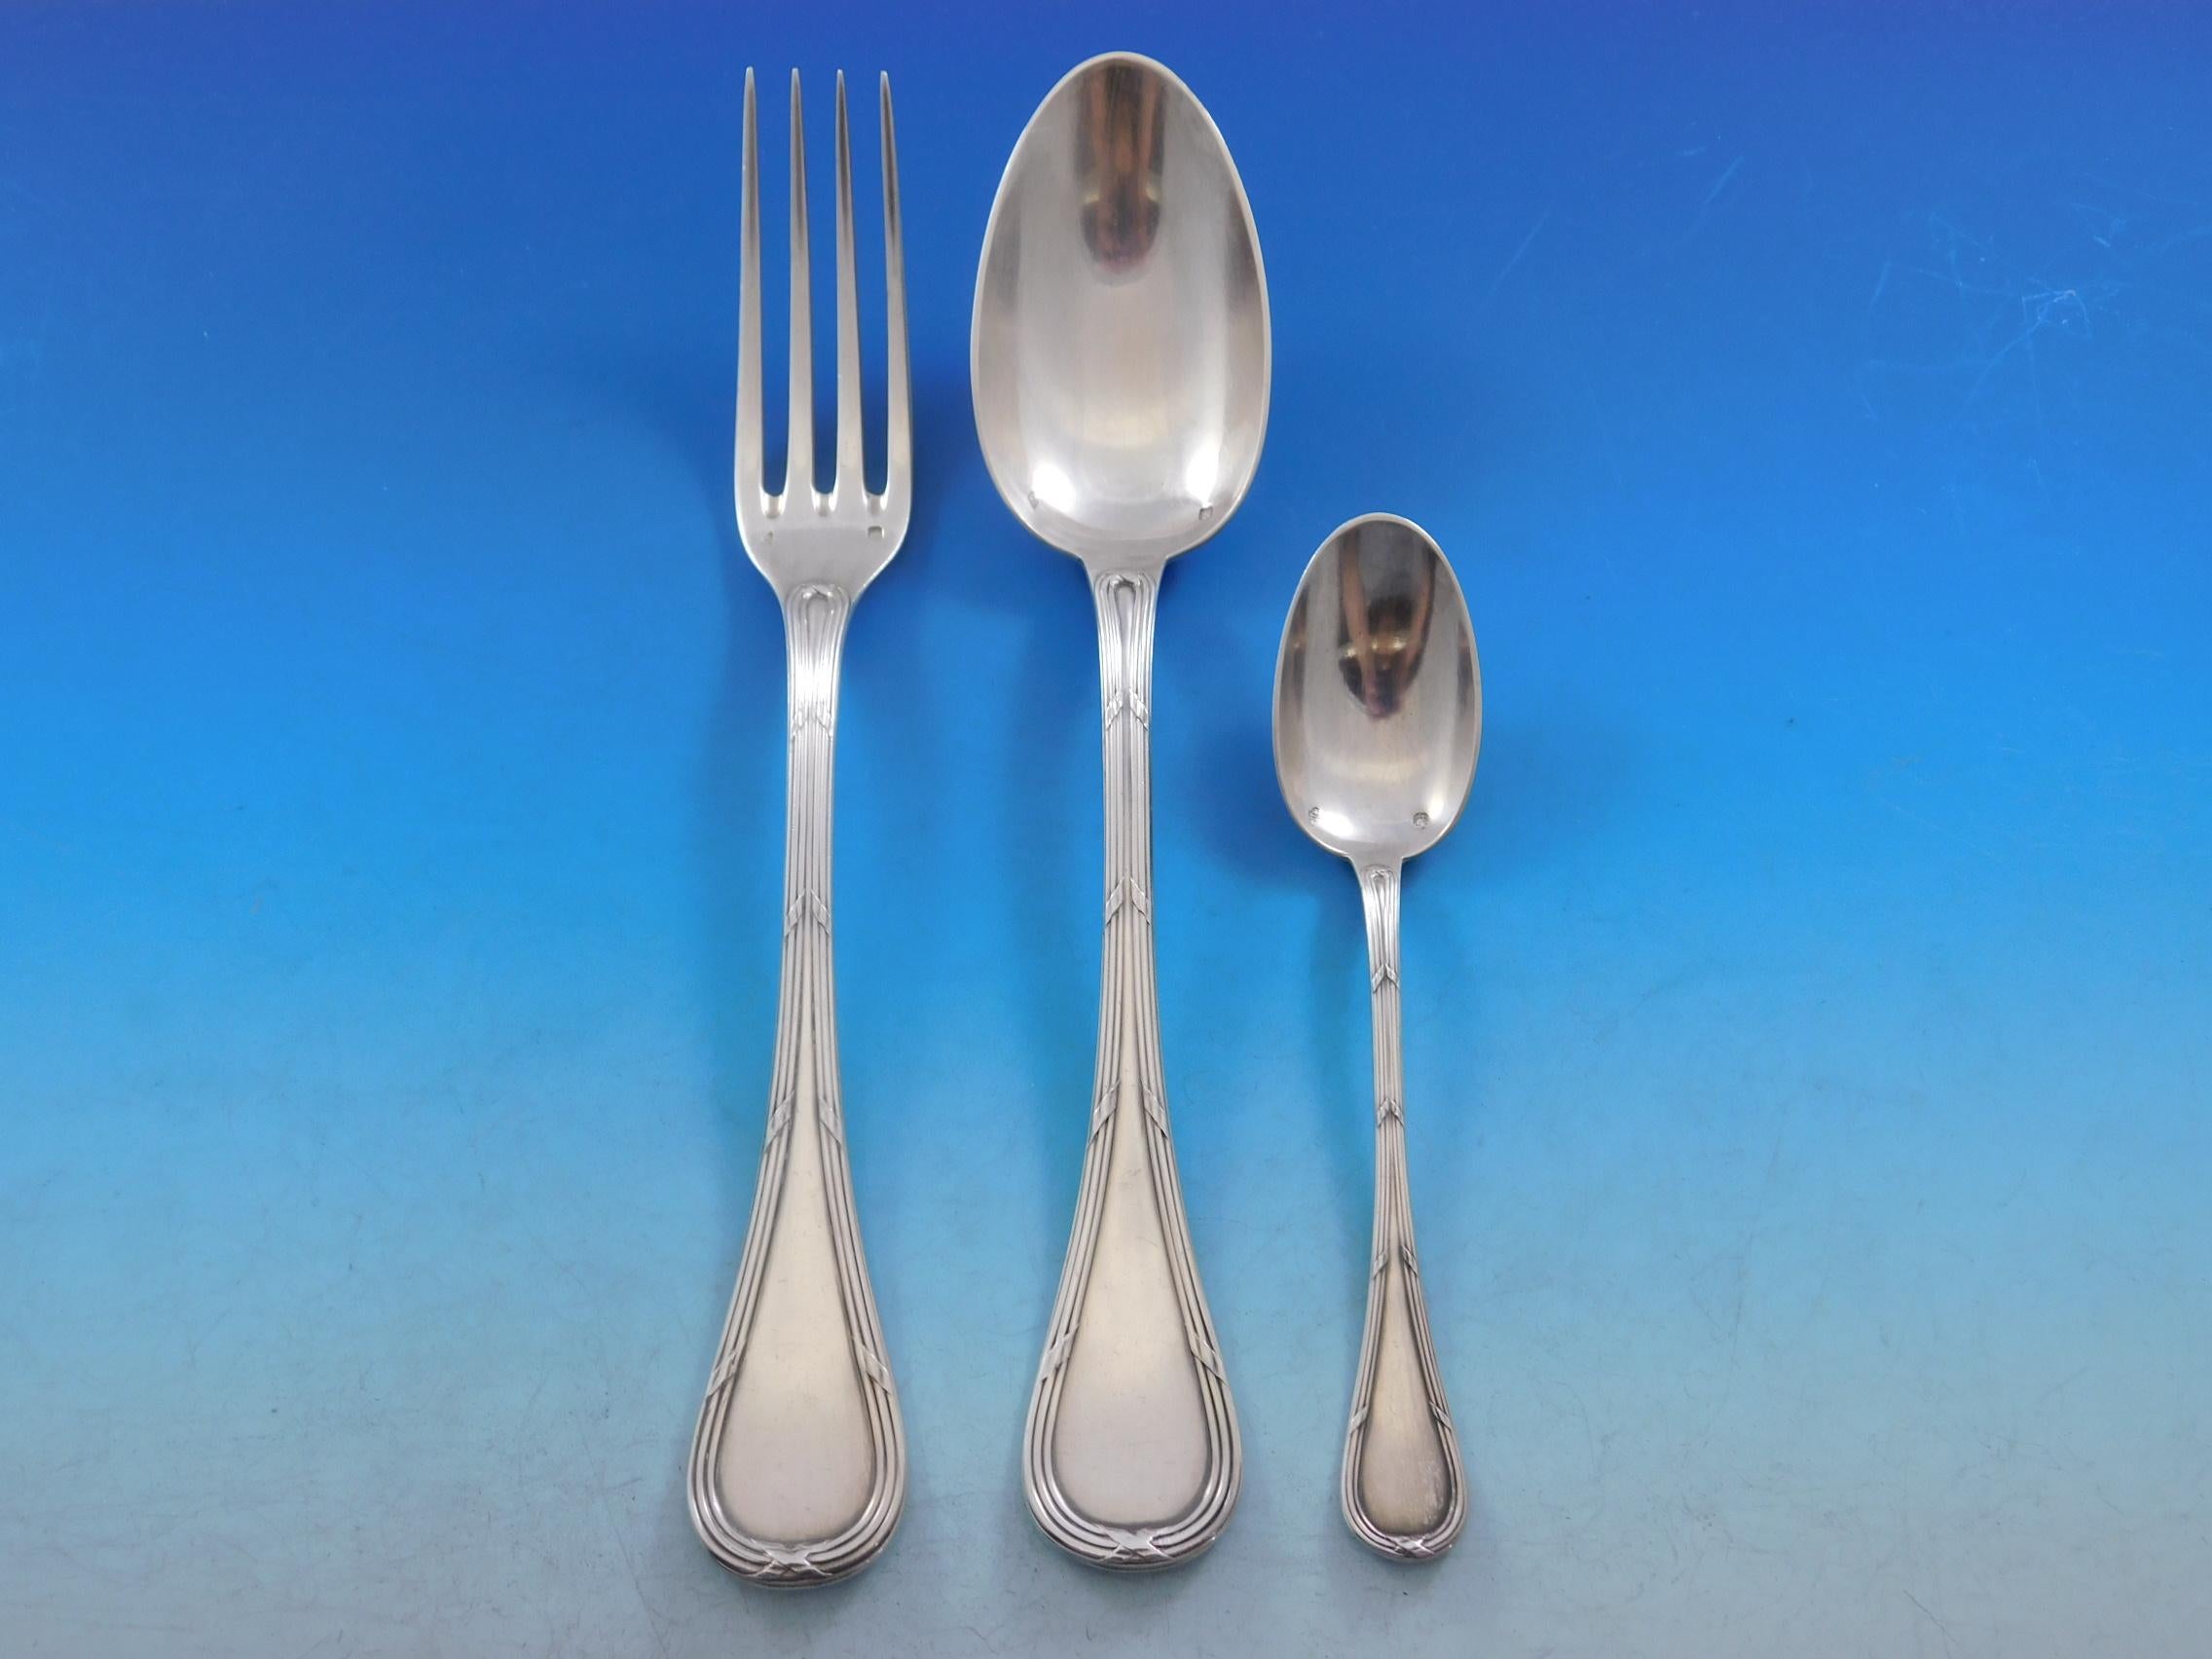 Exquisite Bougainville by Puiforcat France sterling silver flatware set, 37 pieces. This set includes:

12 dinner size forks, 8 3/8